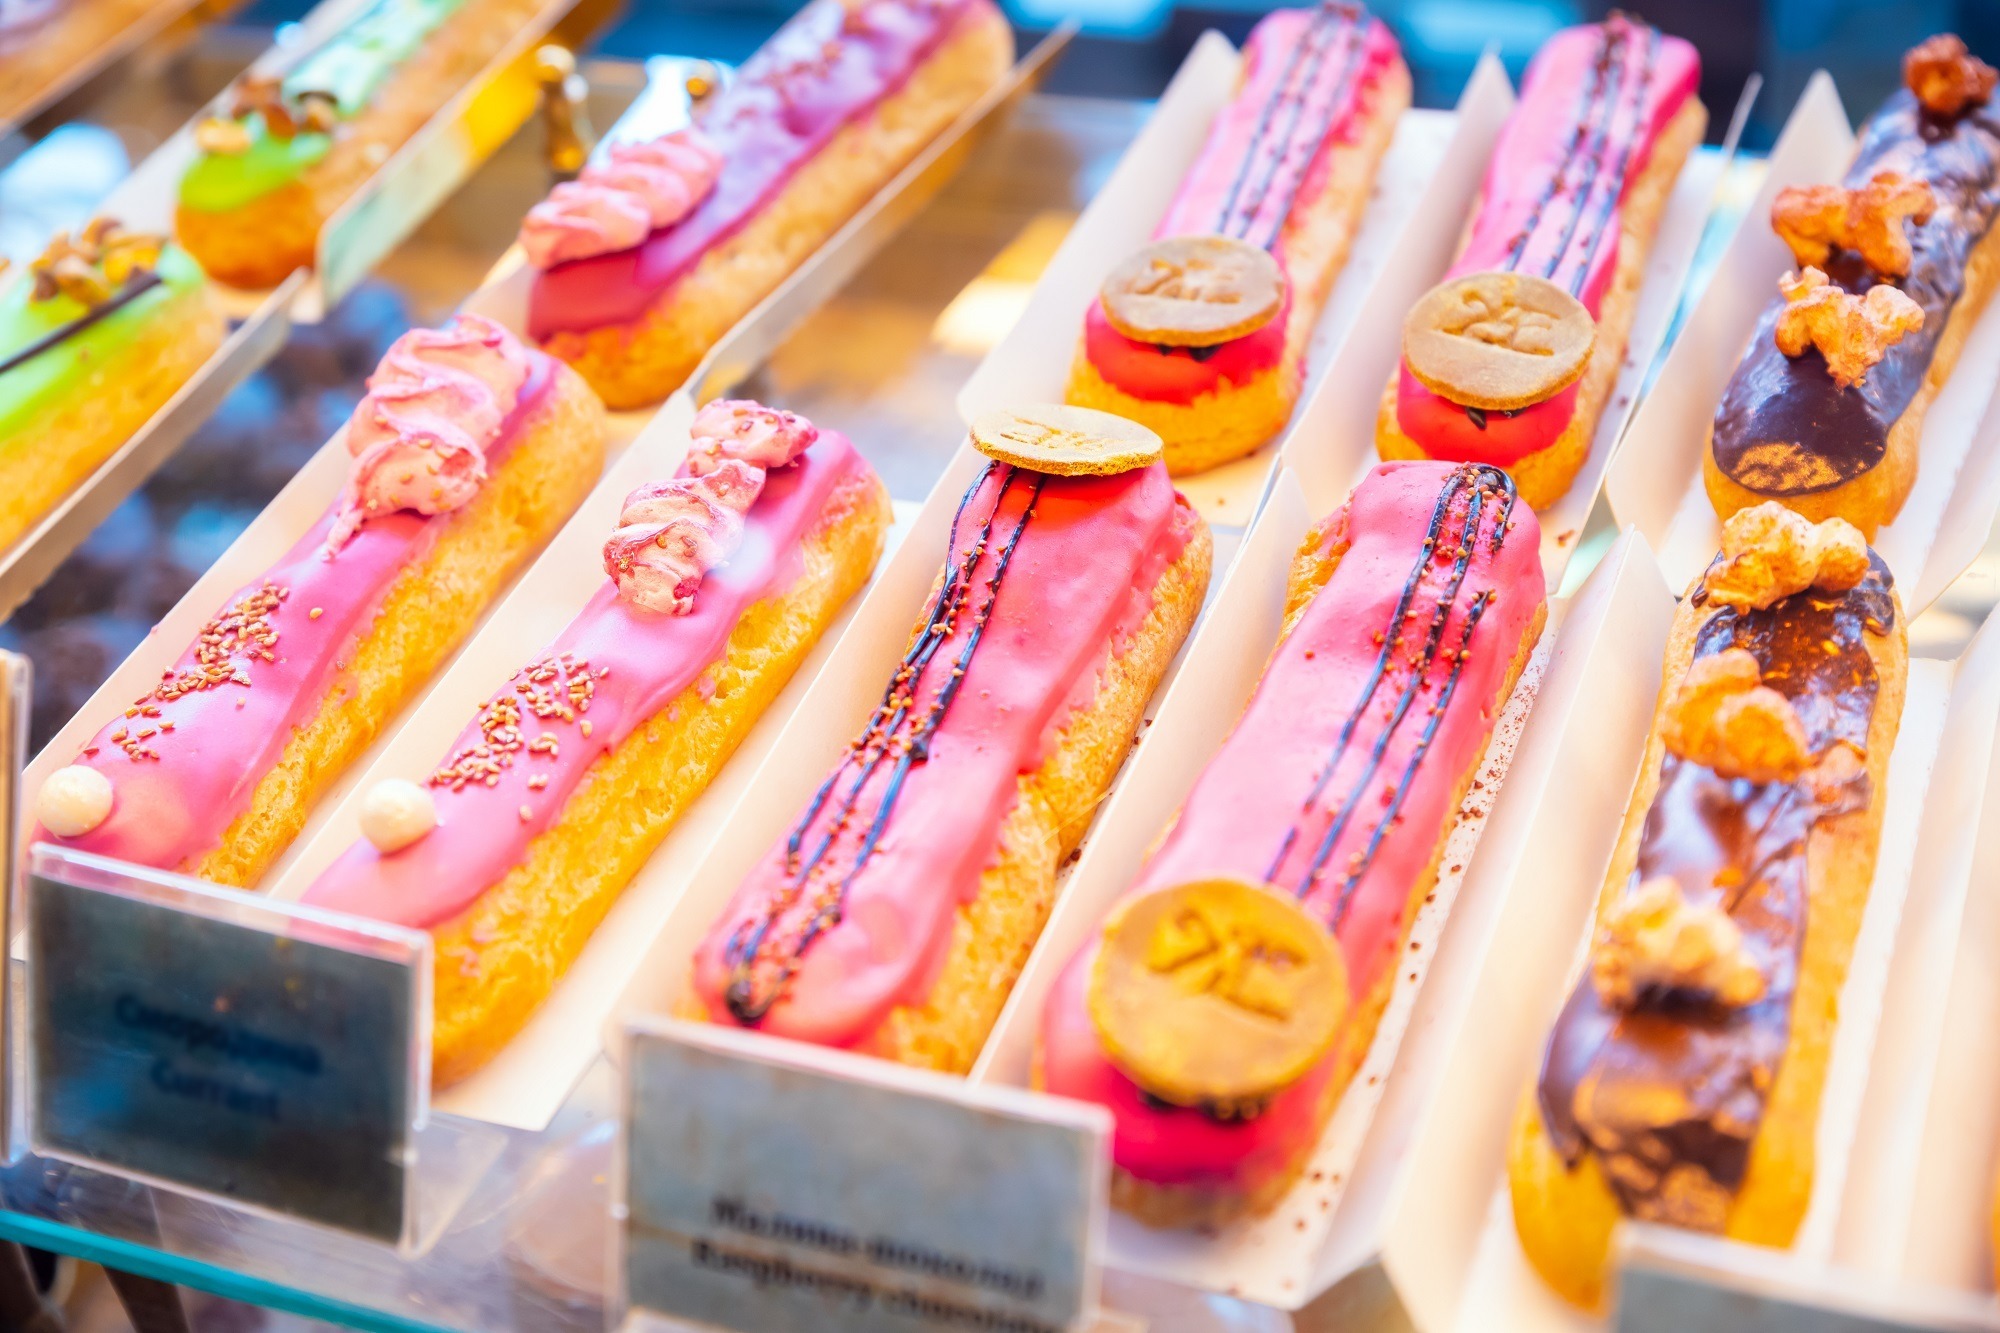 Rows of eclairs with colourful ganache sitting on a shelf